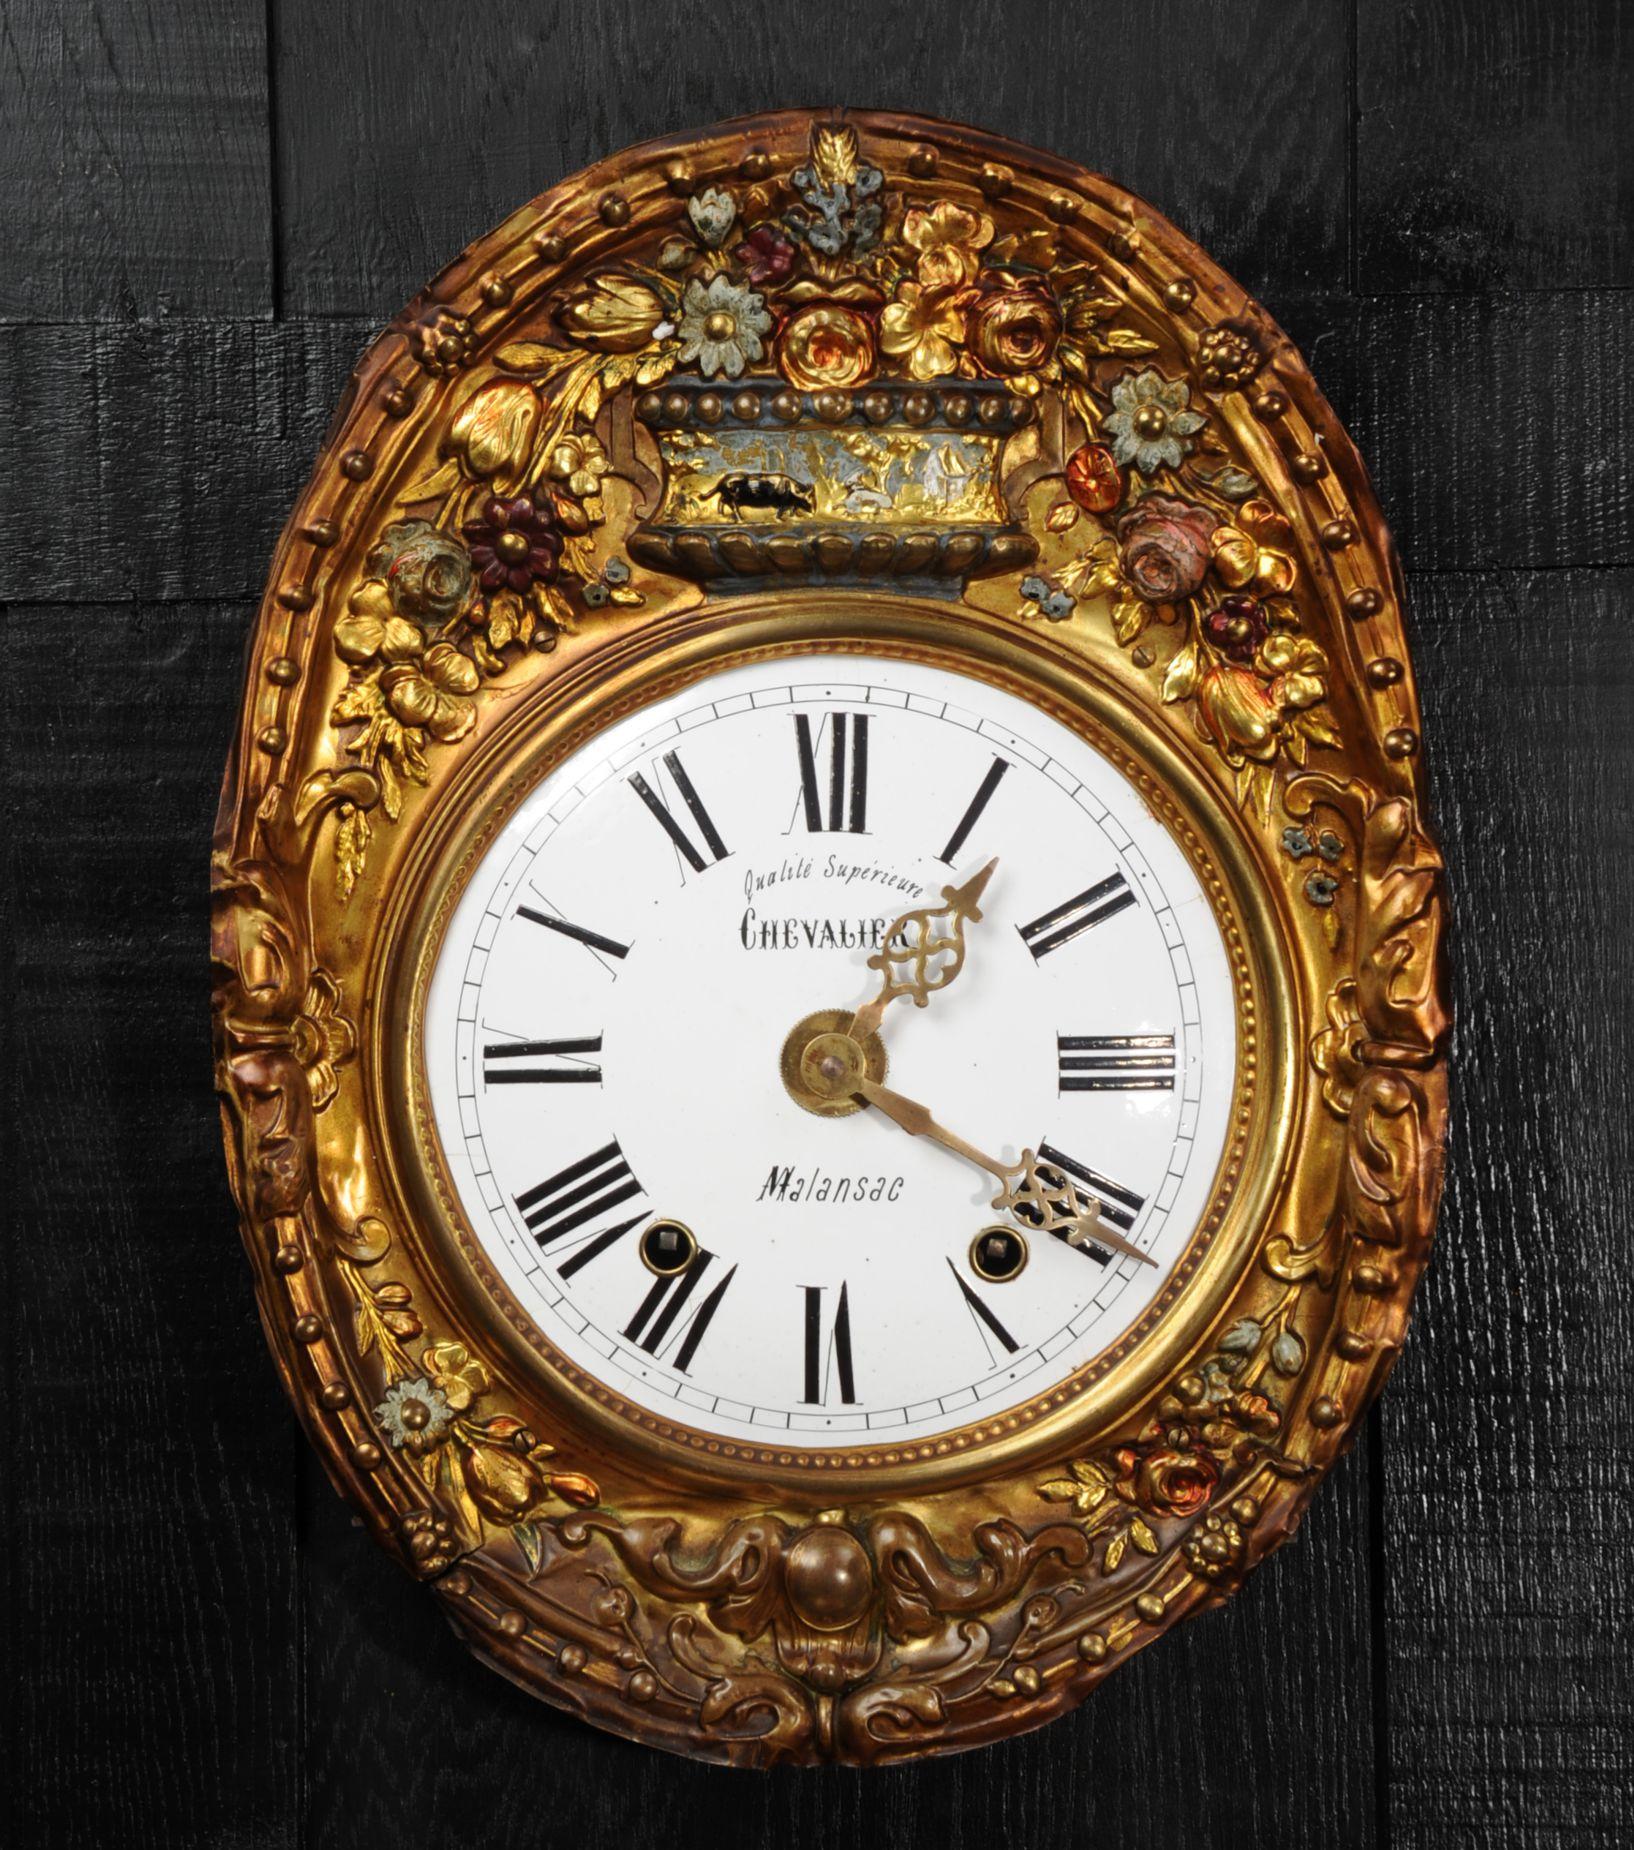 A charming antique French comptoise clock dial, beautifully naïve repoussé work surround with painted decoration, porcelain enamel dial with brass hands. Originally with a large weight driven movement, this was substantially missing. Our clockmaker